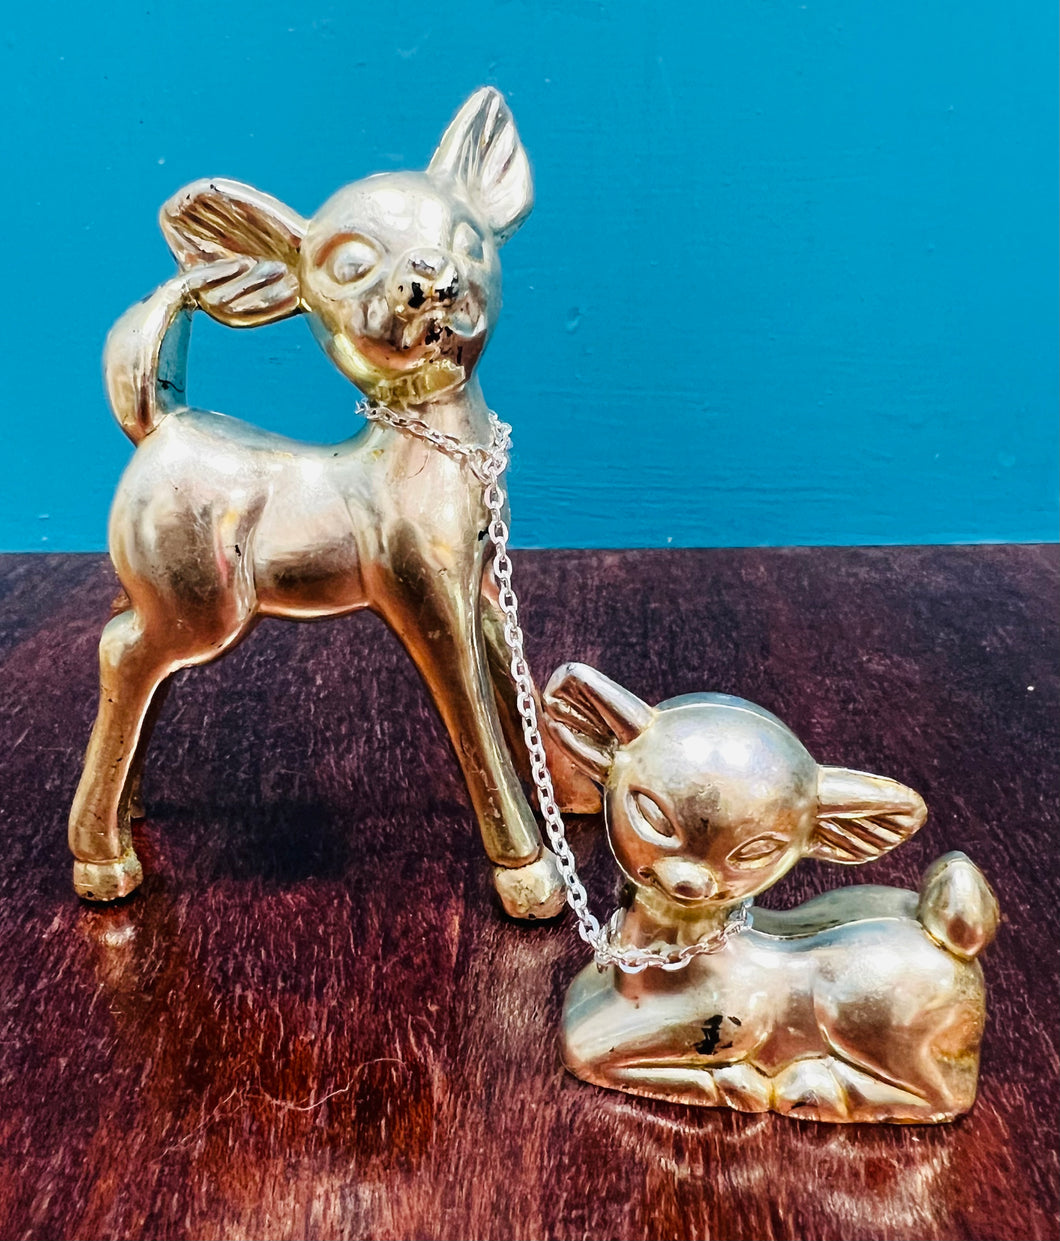 Carw a babi plastic arian Vintage Kitsch mewn cadwyni o’r 60au / Vintage Kitsch plastc silver Deer and baby in chain from the 60s